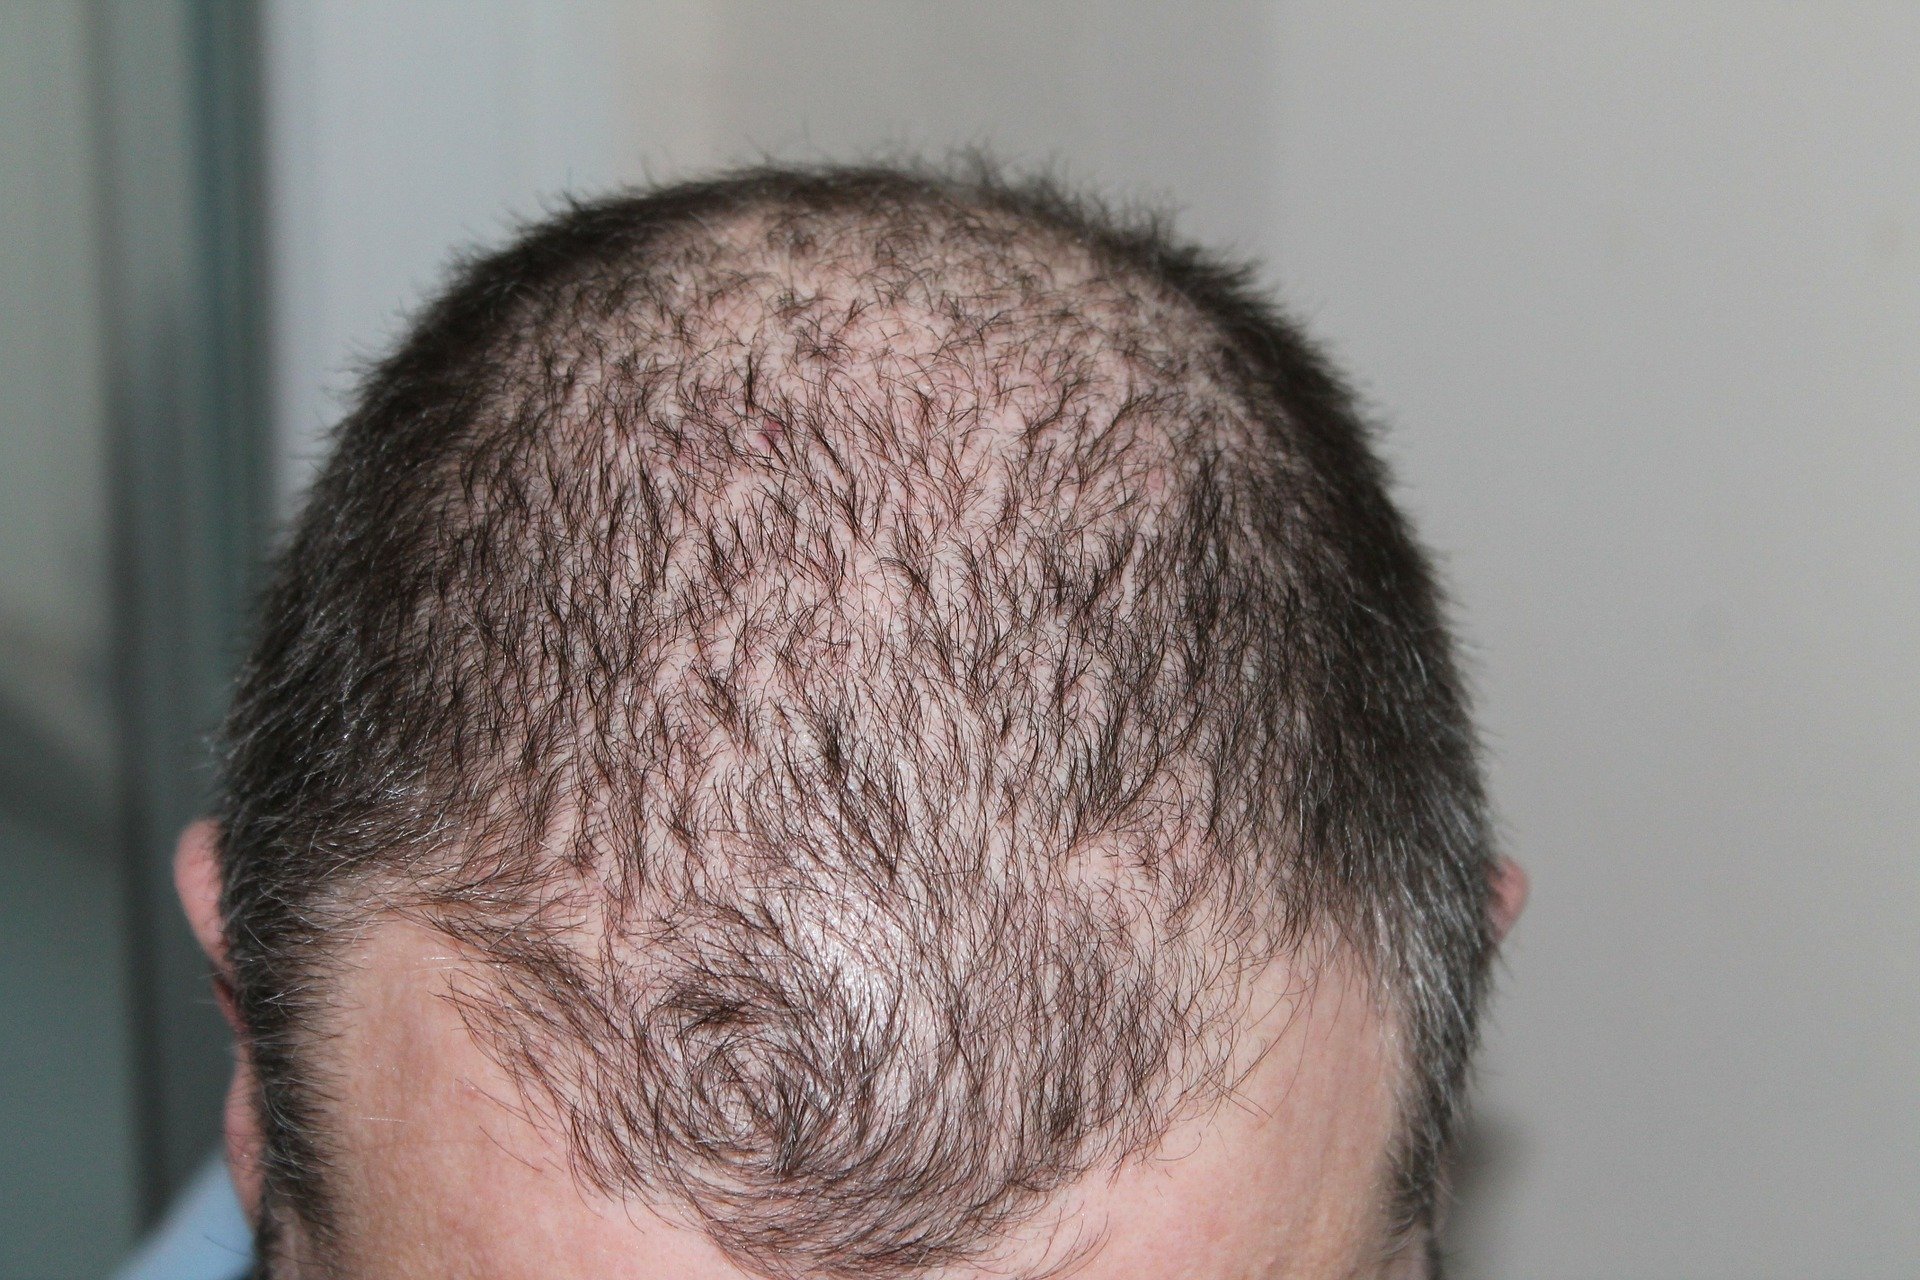 Hair today, gone tomorrow: Minoxidil drug sellers hit by MHRA